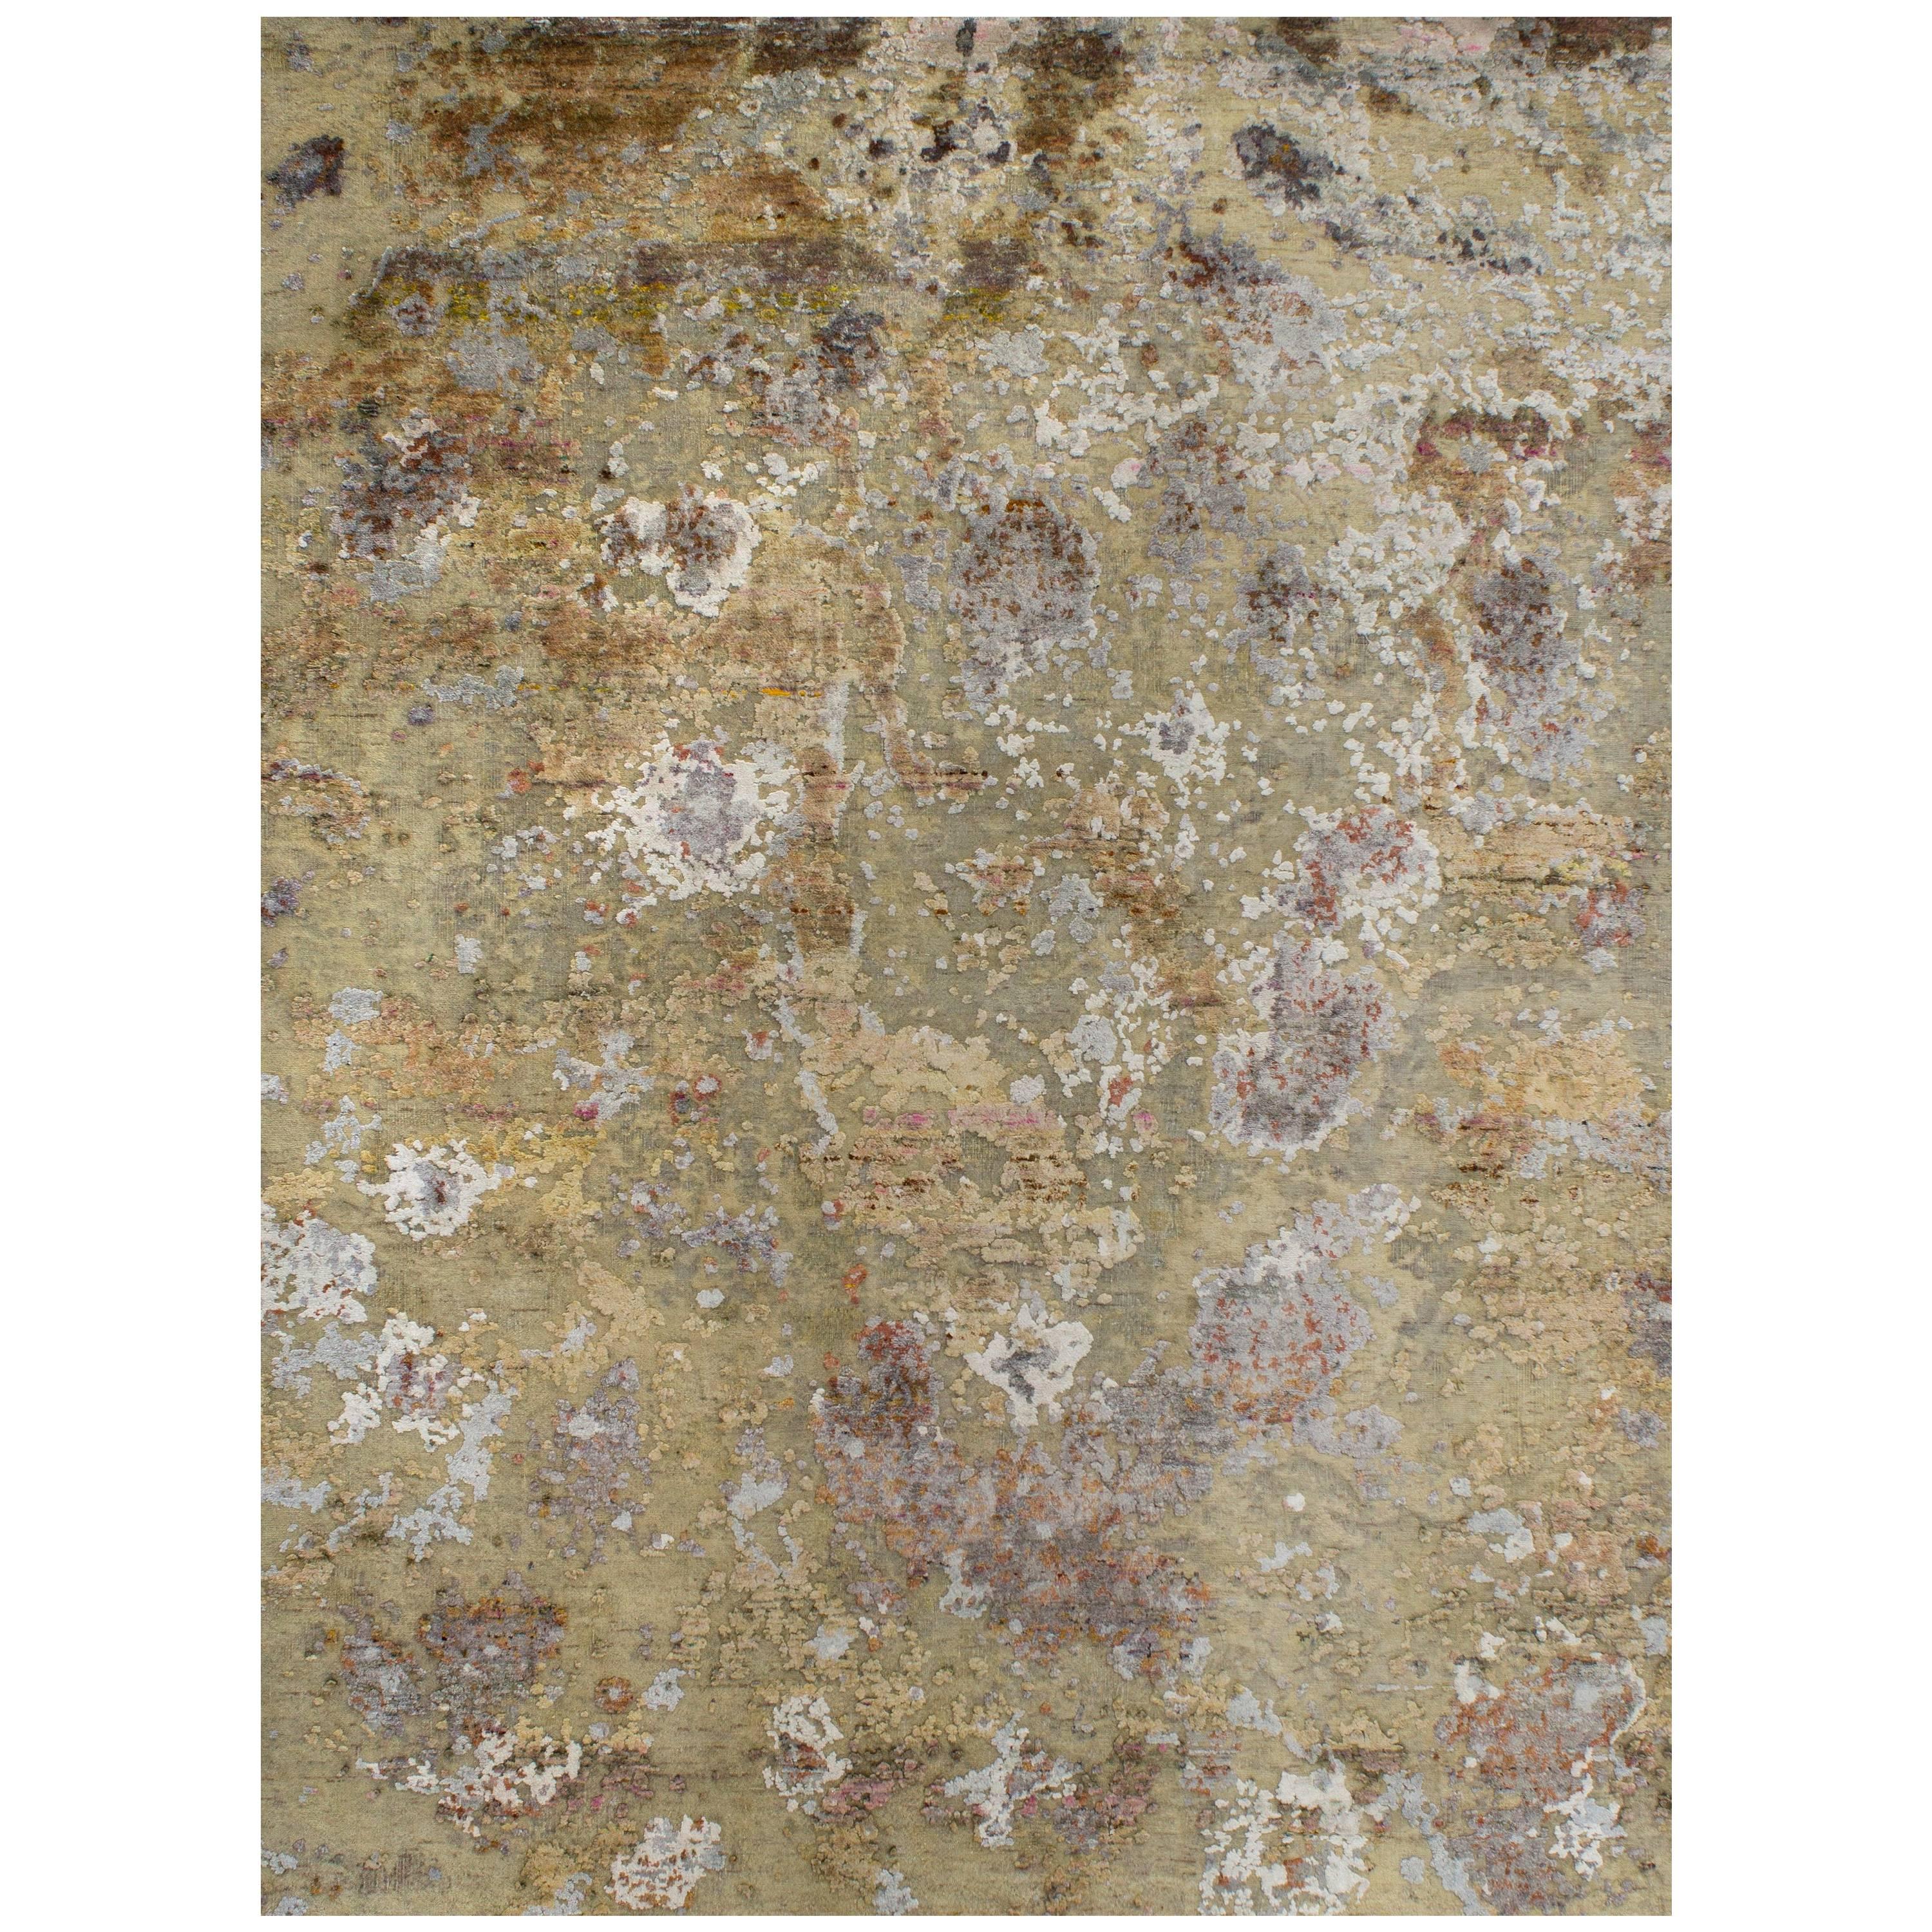 Gold Copper Rust Peach Beige Grey Hi-Low Hand-knotted Wool and Silk Rug in Stock